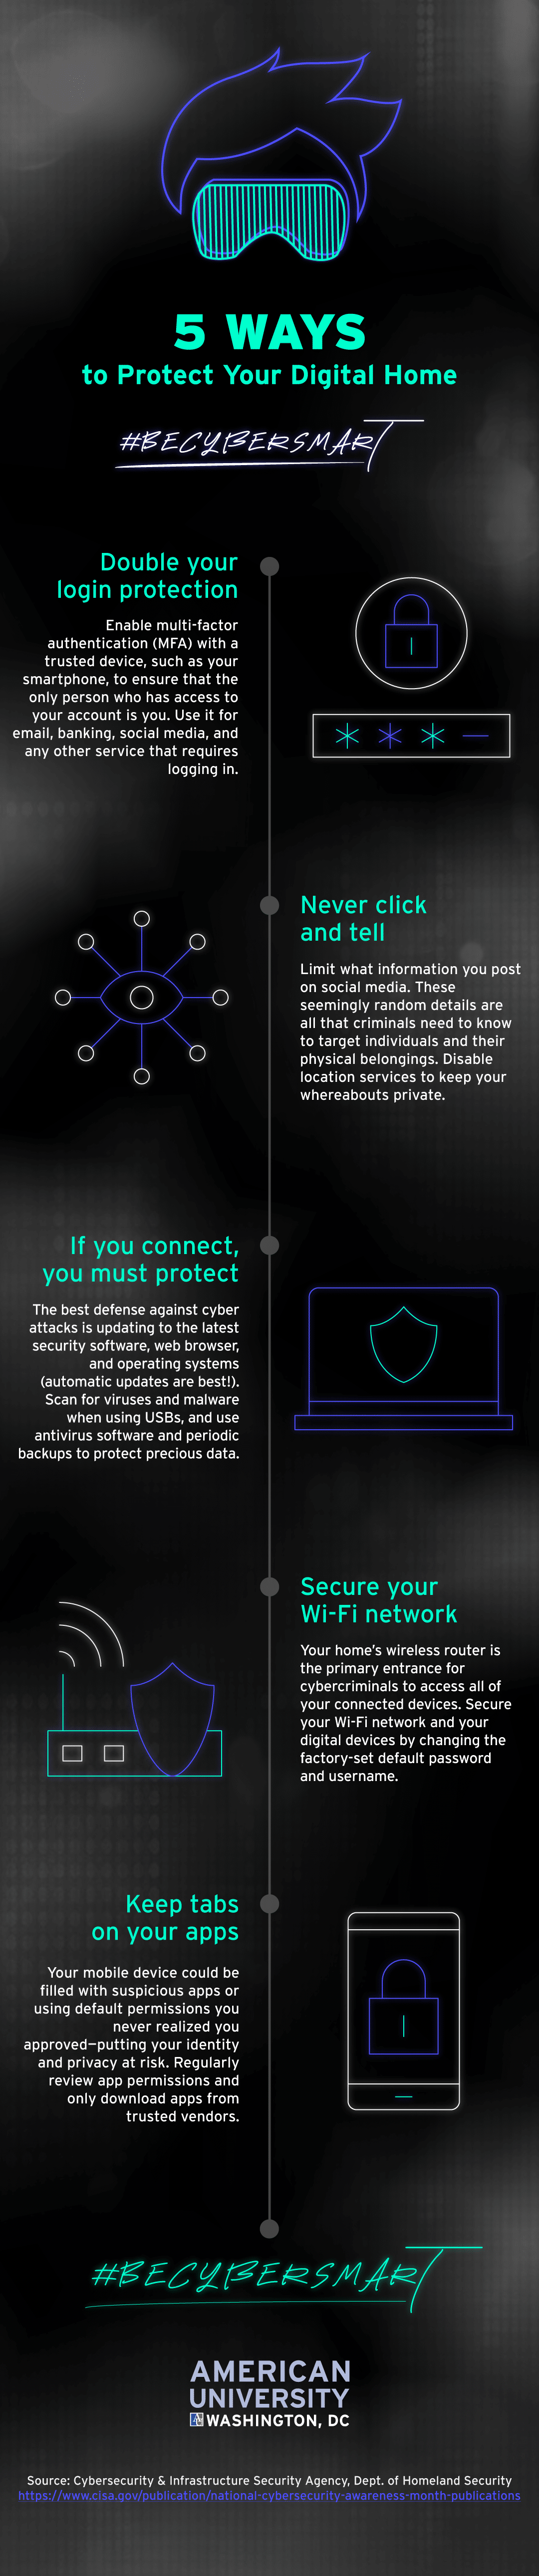 Protect your digital home